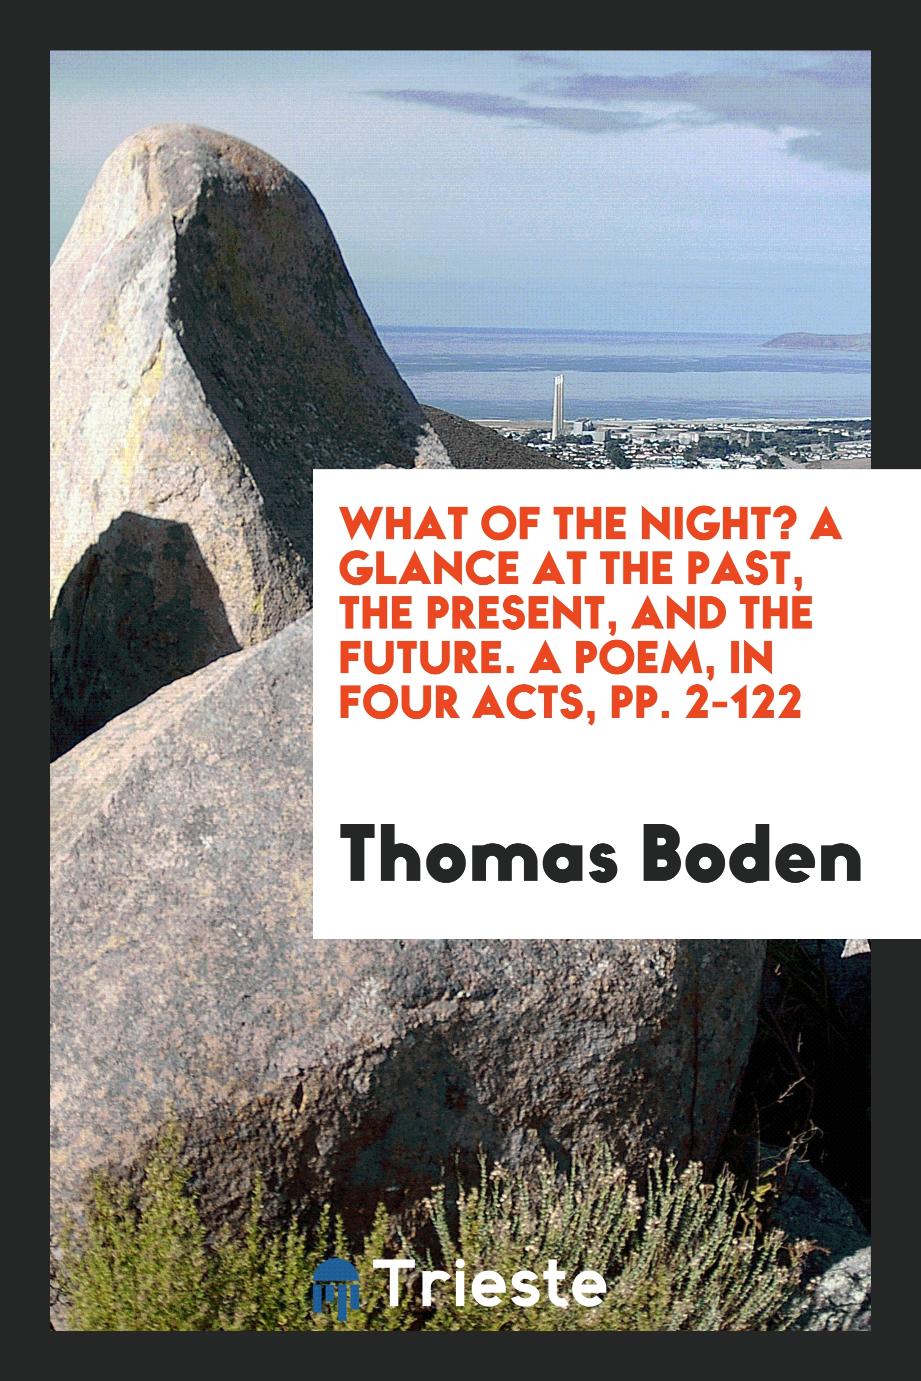 What of the Night? A Glance at the Past, the Present, and the Future. A Poem, in Four Acts, pp. 2-122